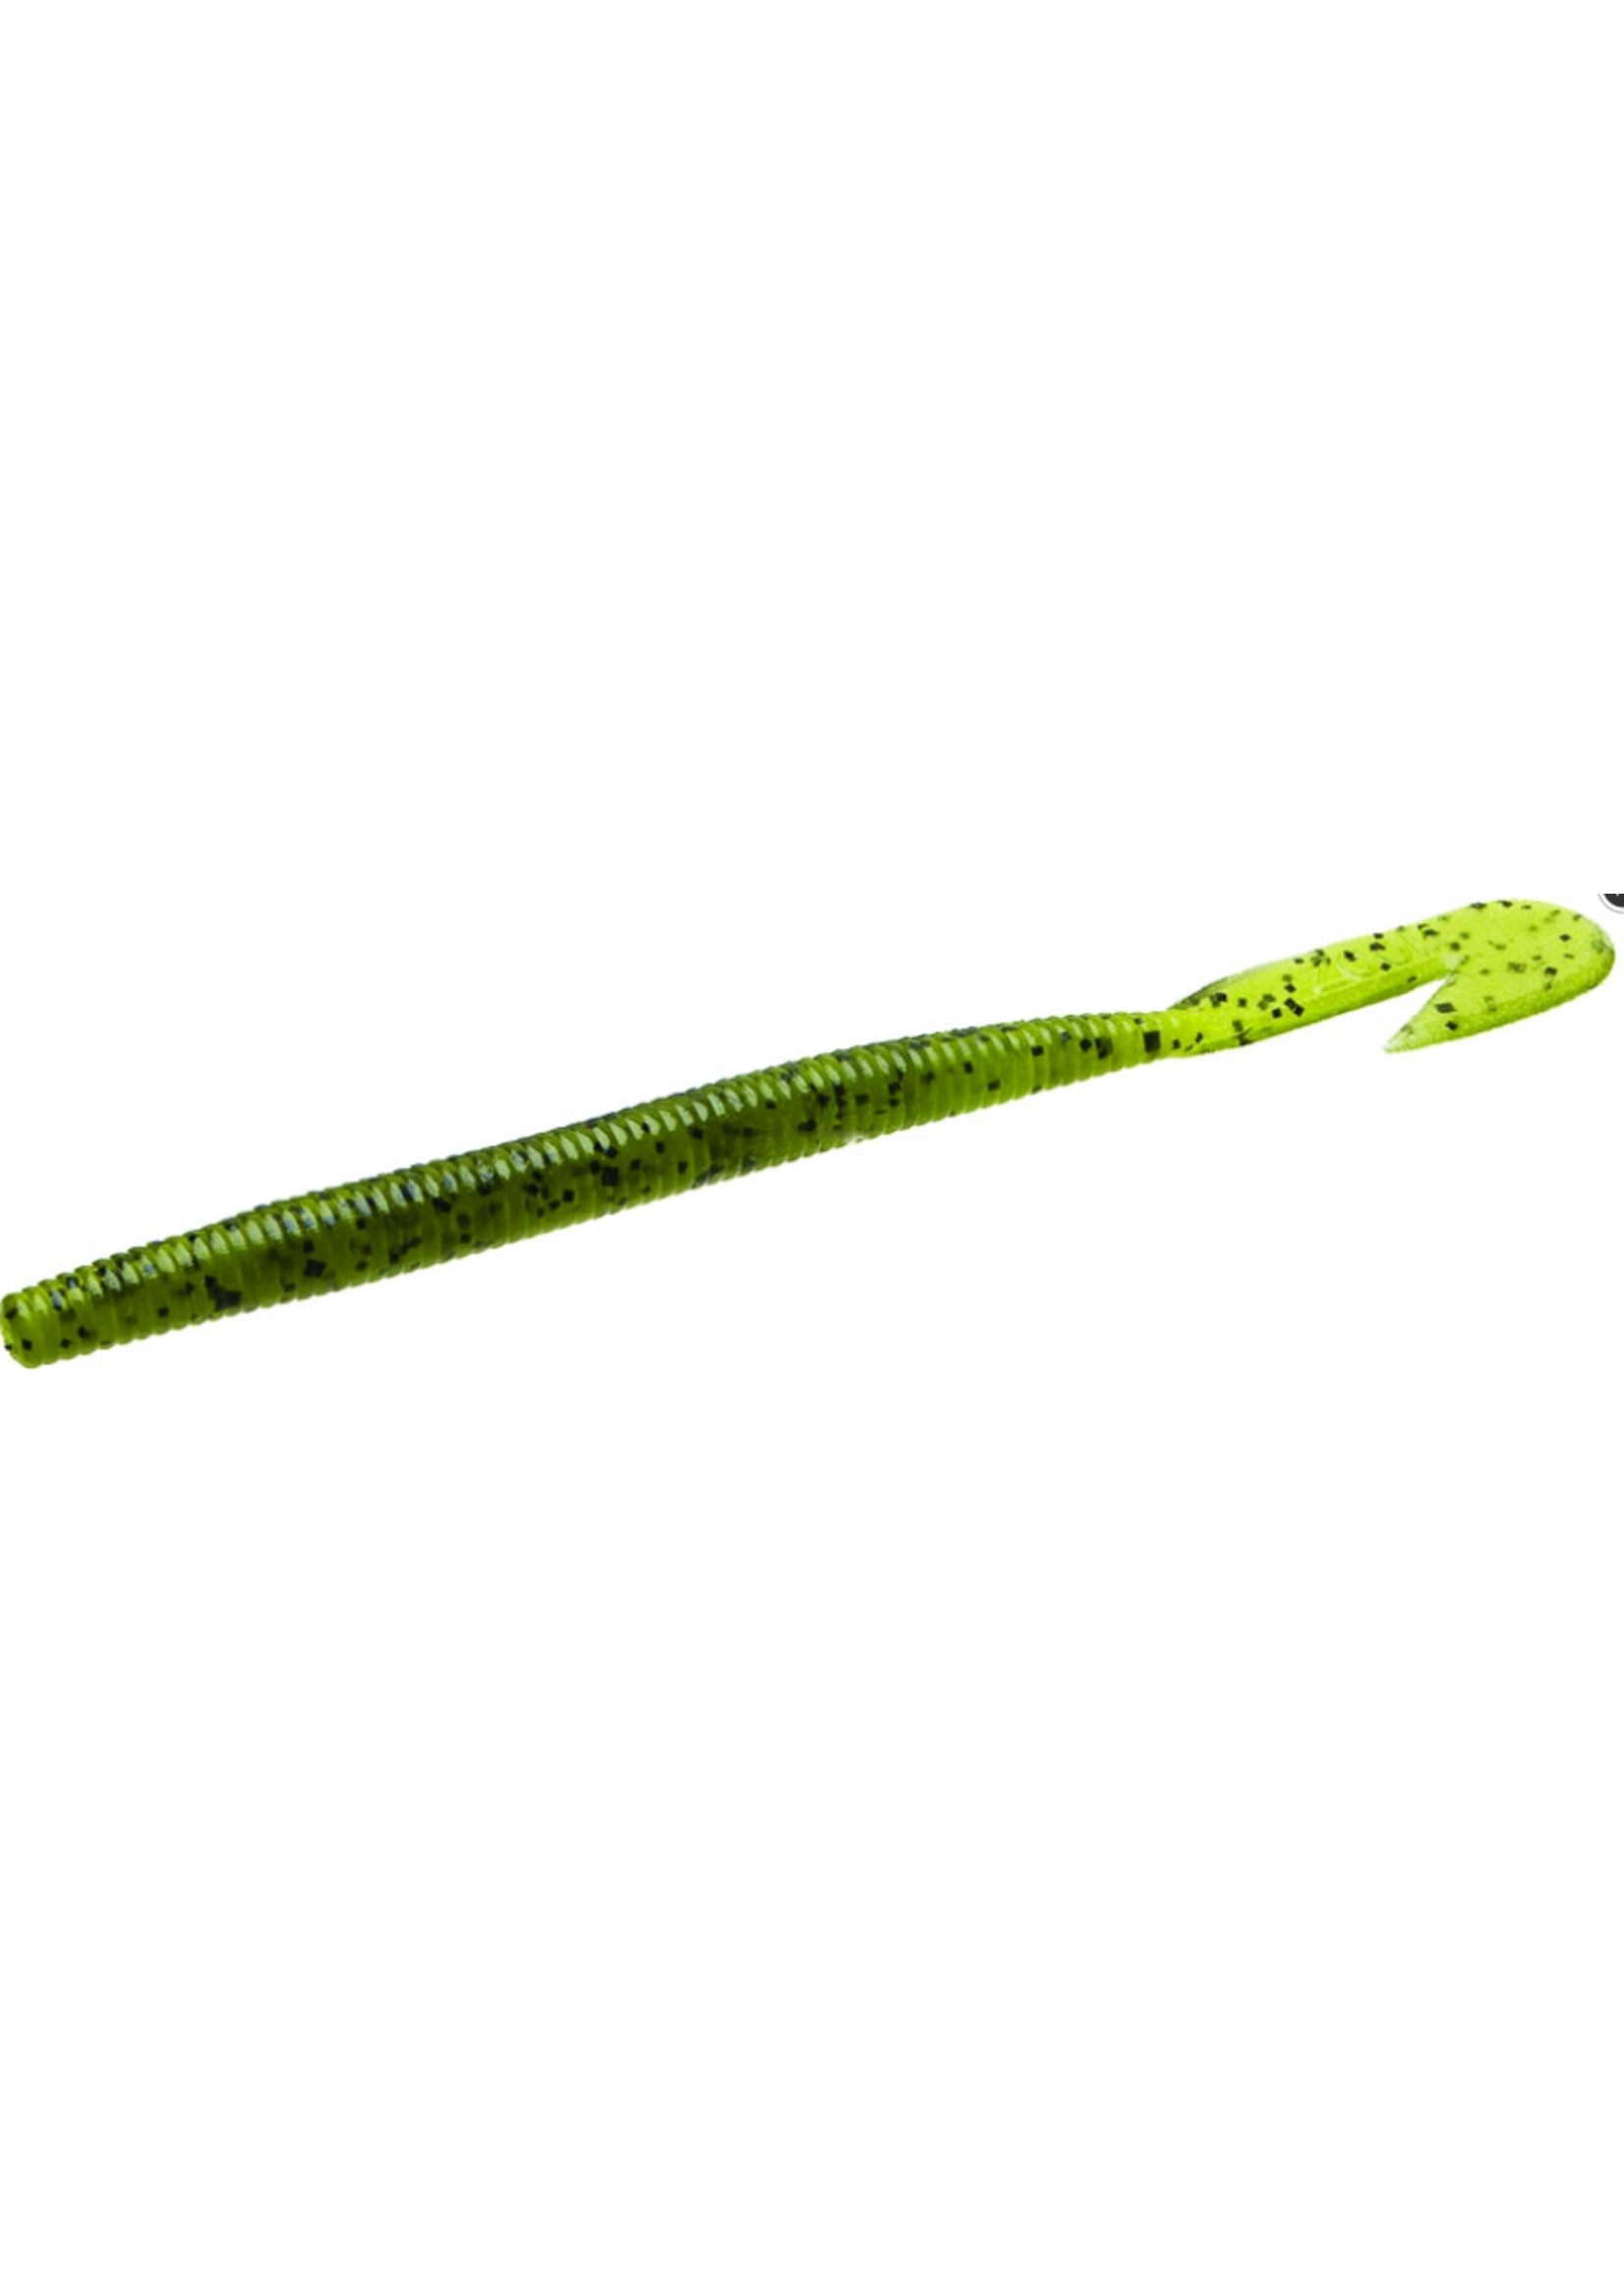 Zoom Ultra-Vibe Speed Worm 6, 15Pk, Watermelon Seed - Brothers Outdoors LLC